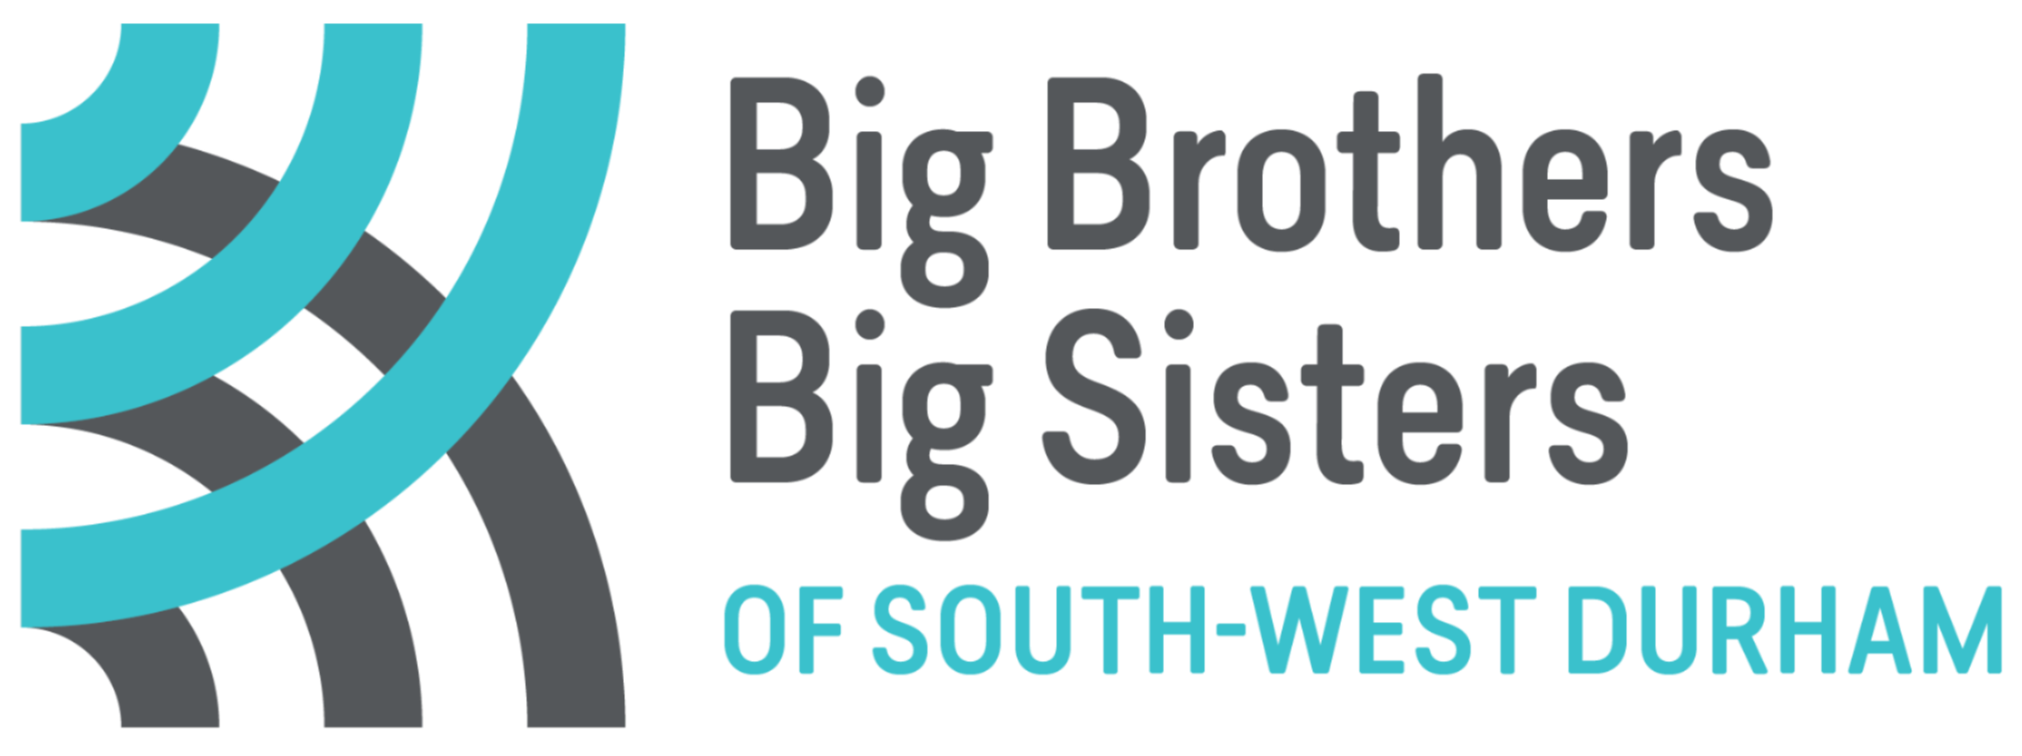 Big Brothers Big Sisters of South-West Durham